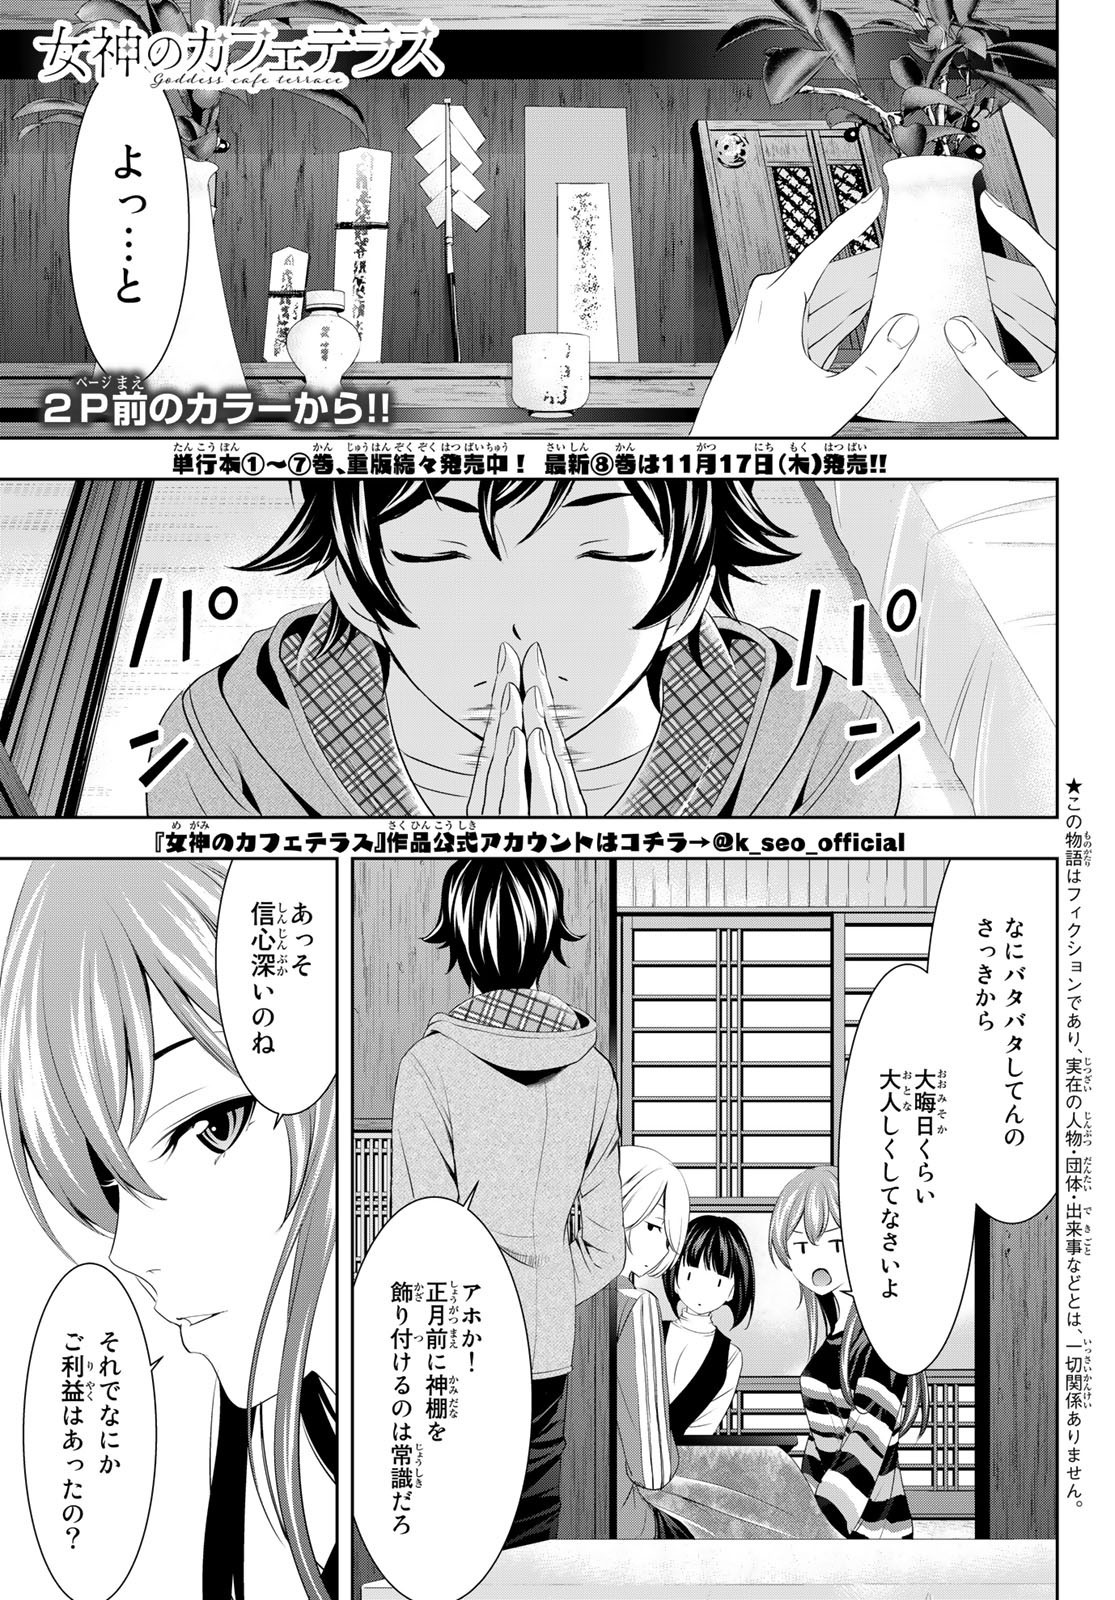 Goddess-Cafe-Terrace - Chapter 083 - Page 3